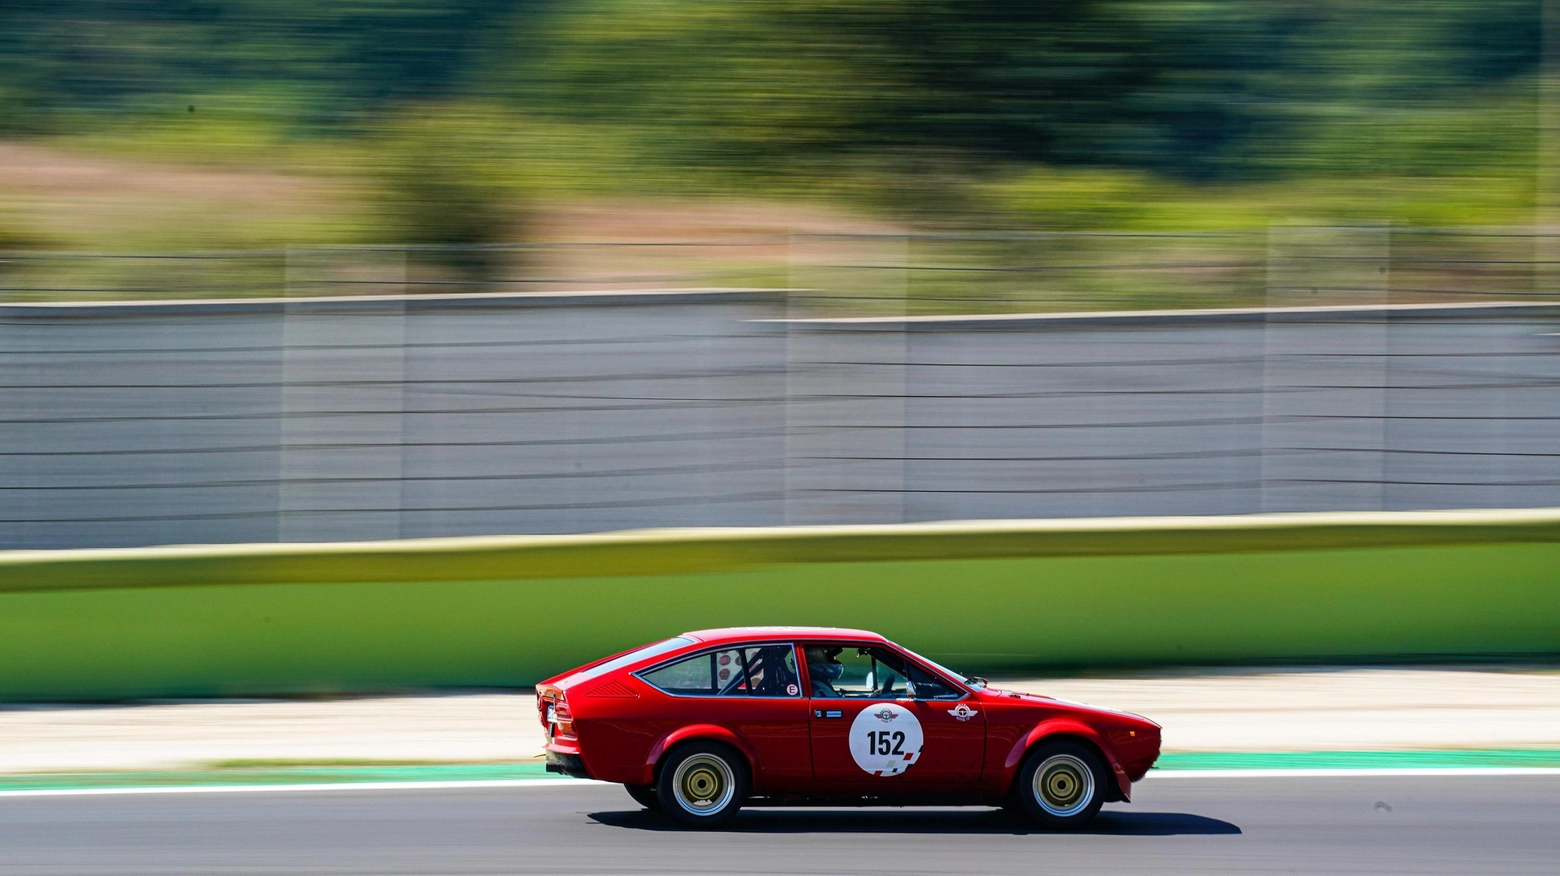 Dopo Vallelunga. Revival Cup a Misano